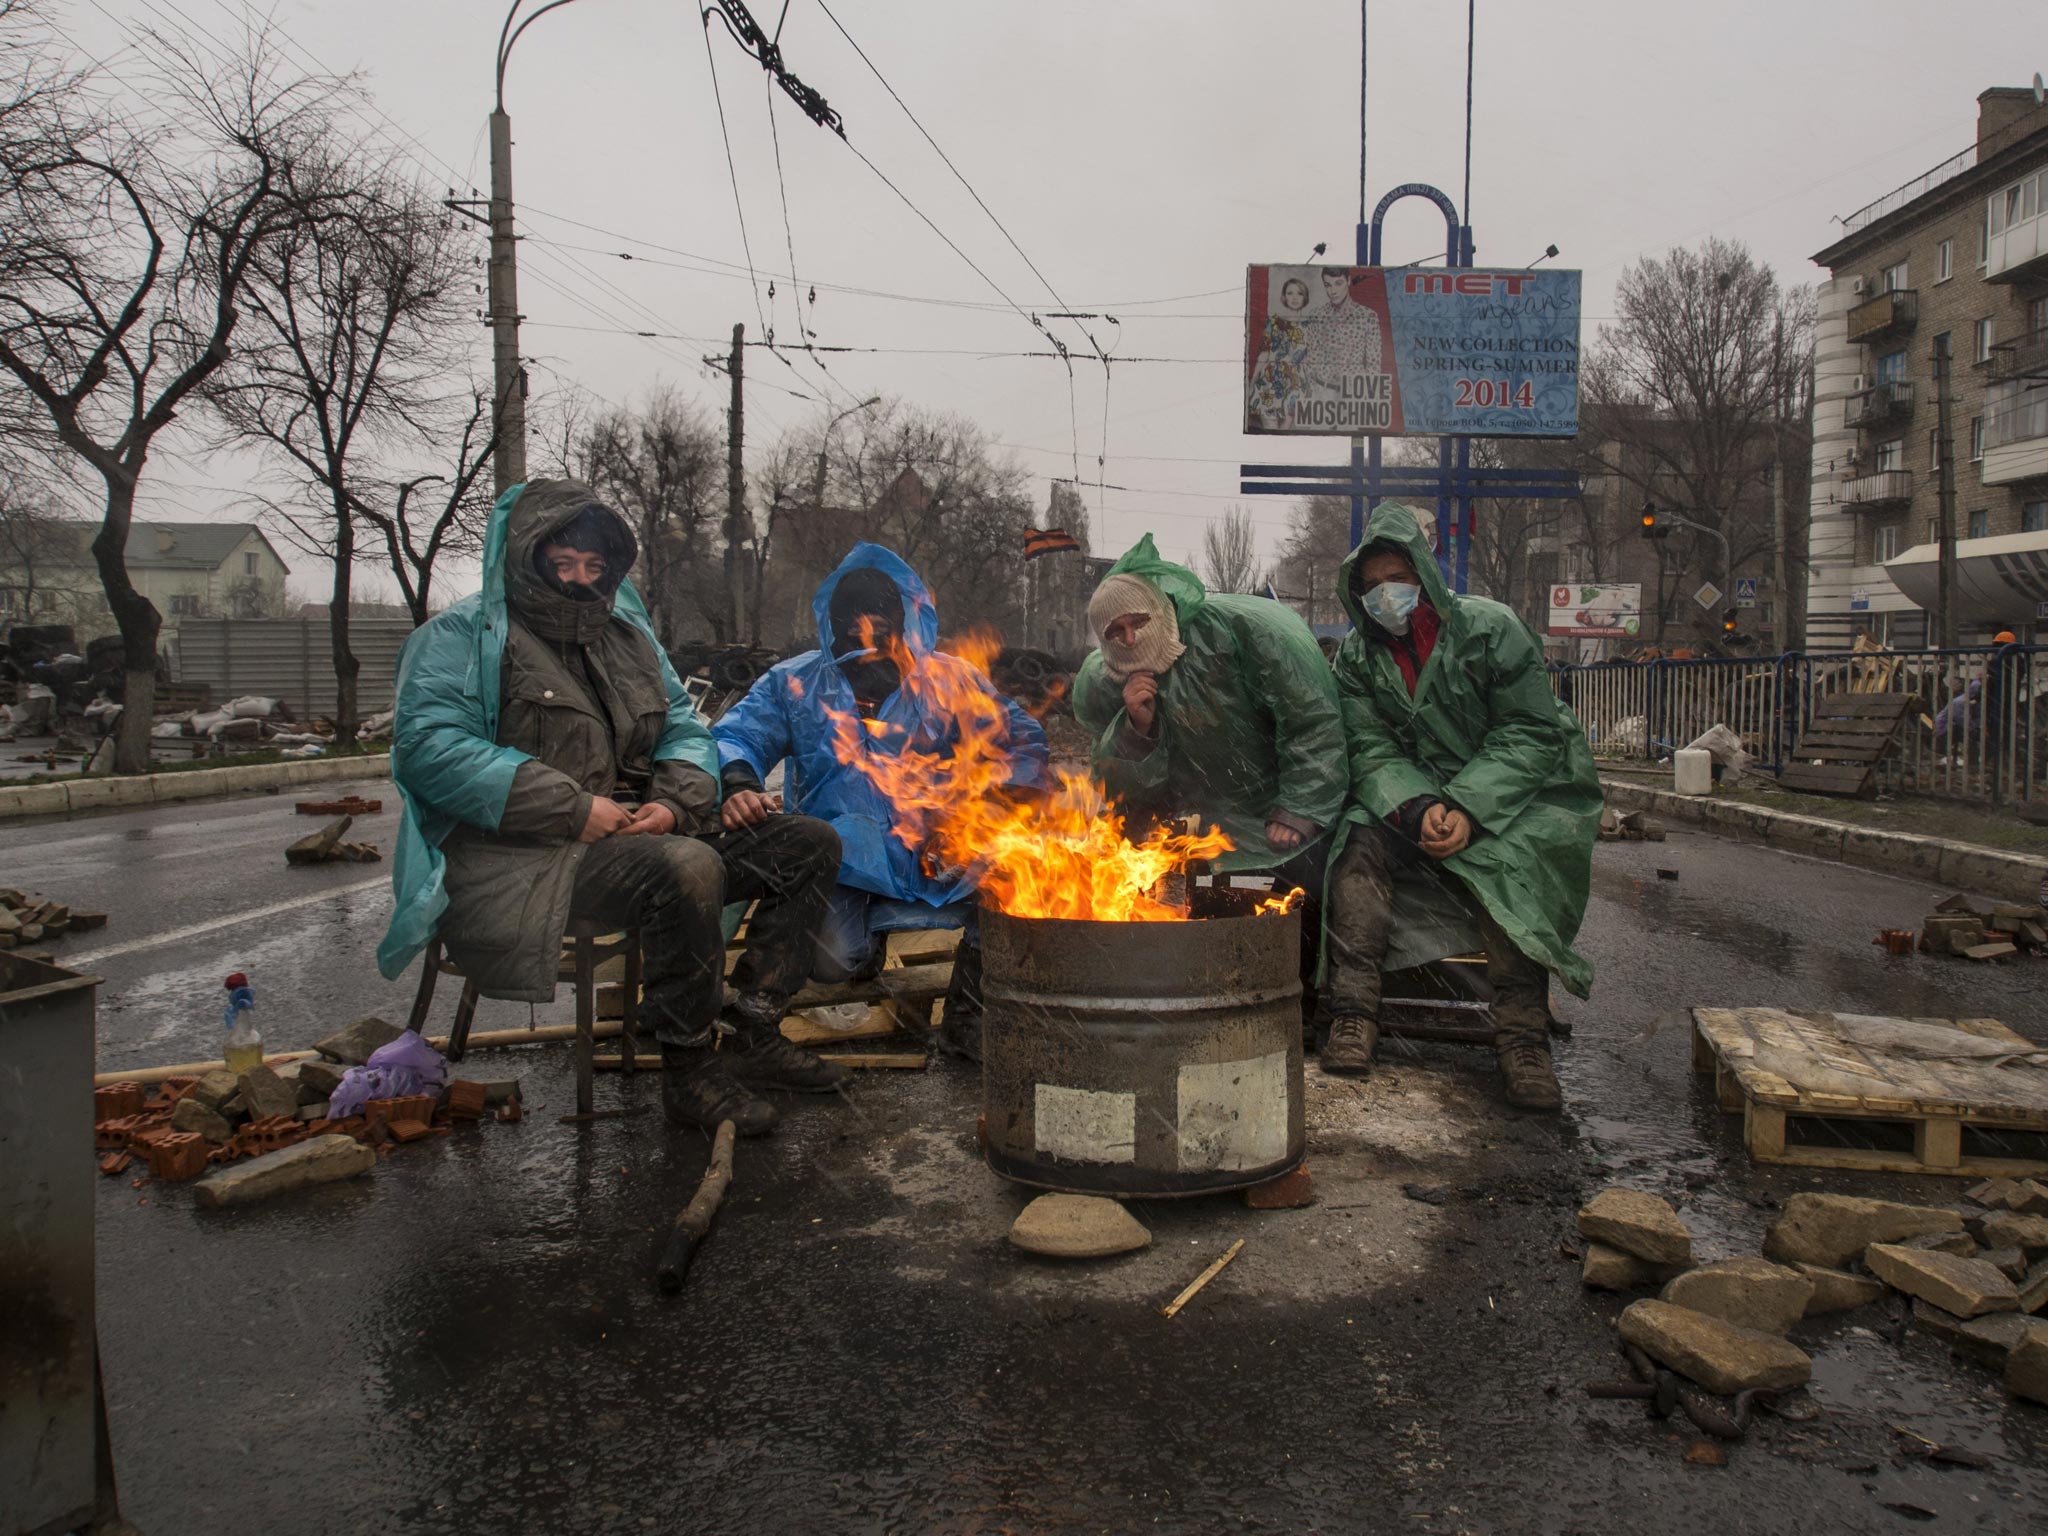 Pro-Russian activists warm themselves at a bonfire next to barricades in front of an entrance to the Ukrainian regional office of the Security Service in Luhansk